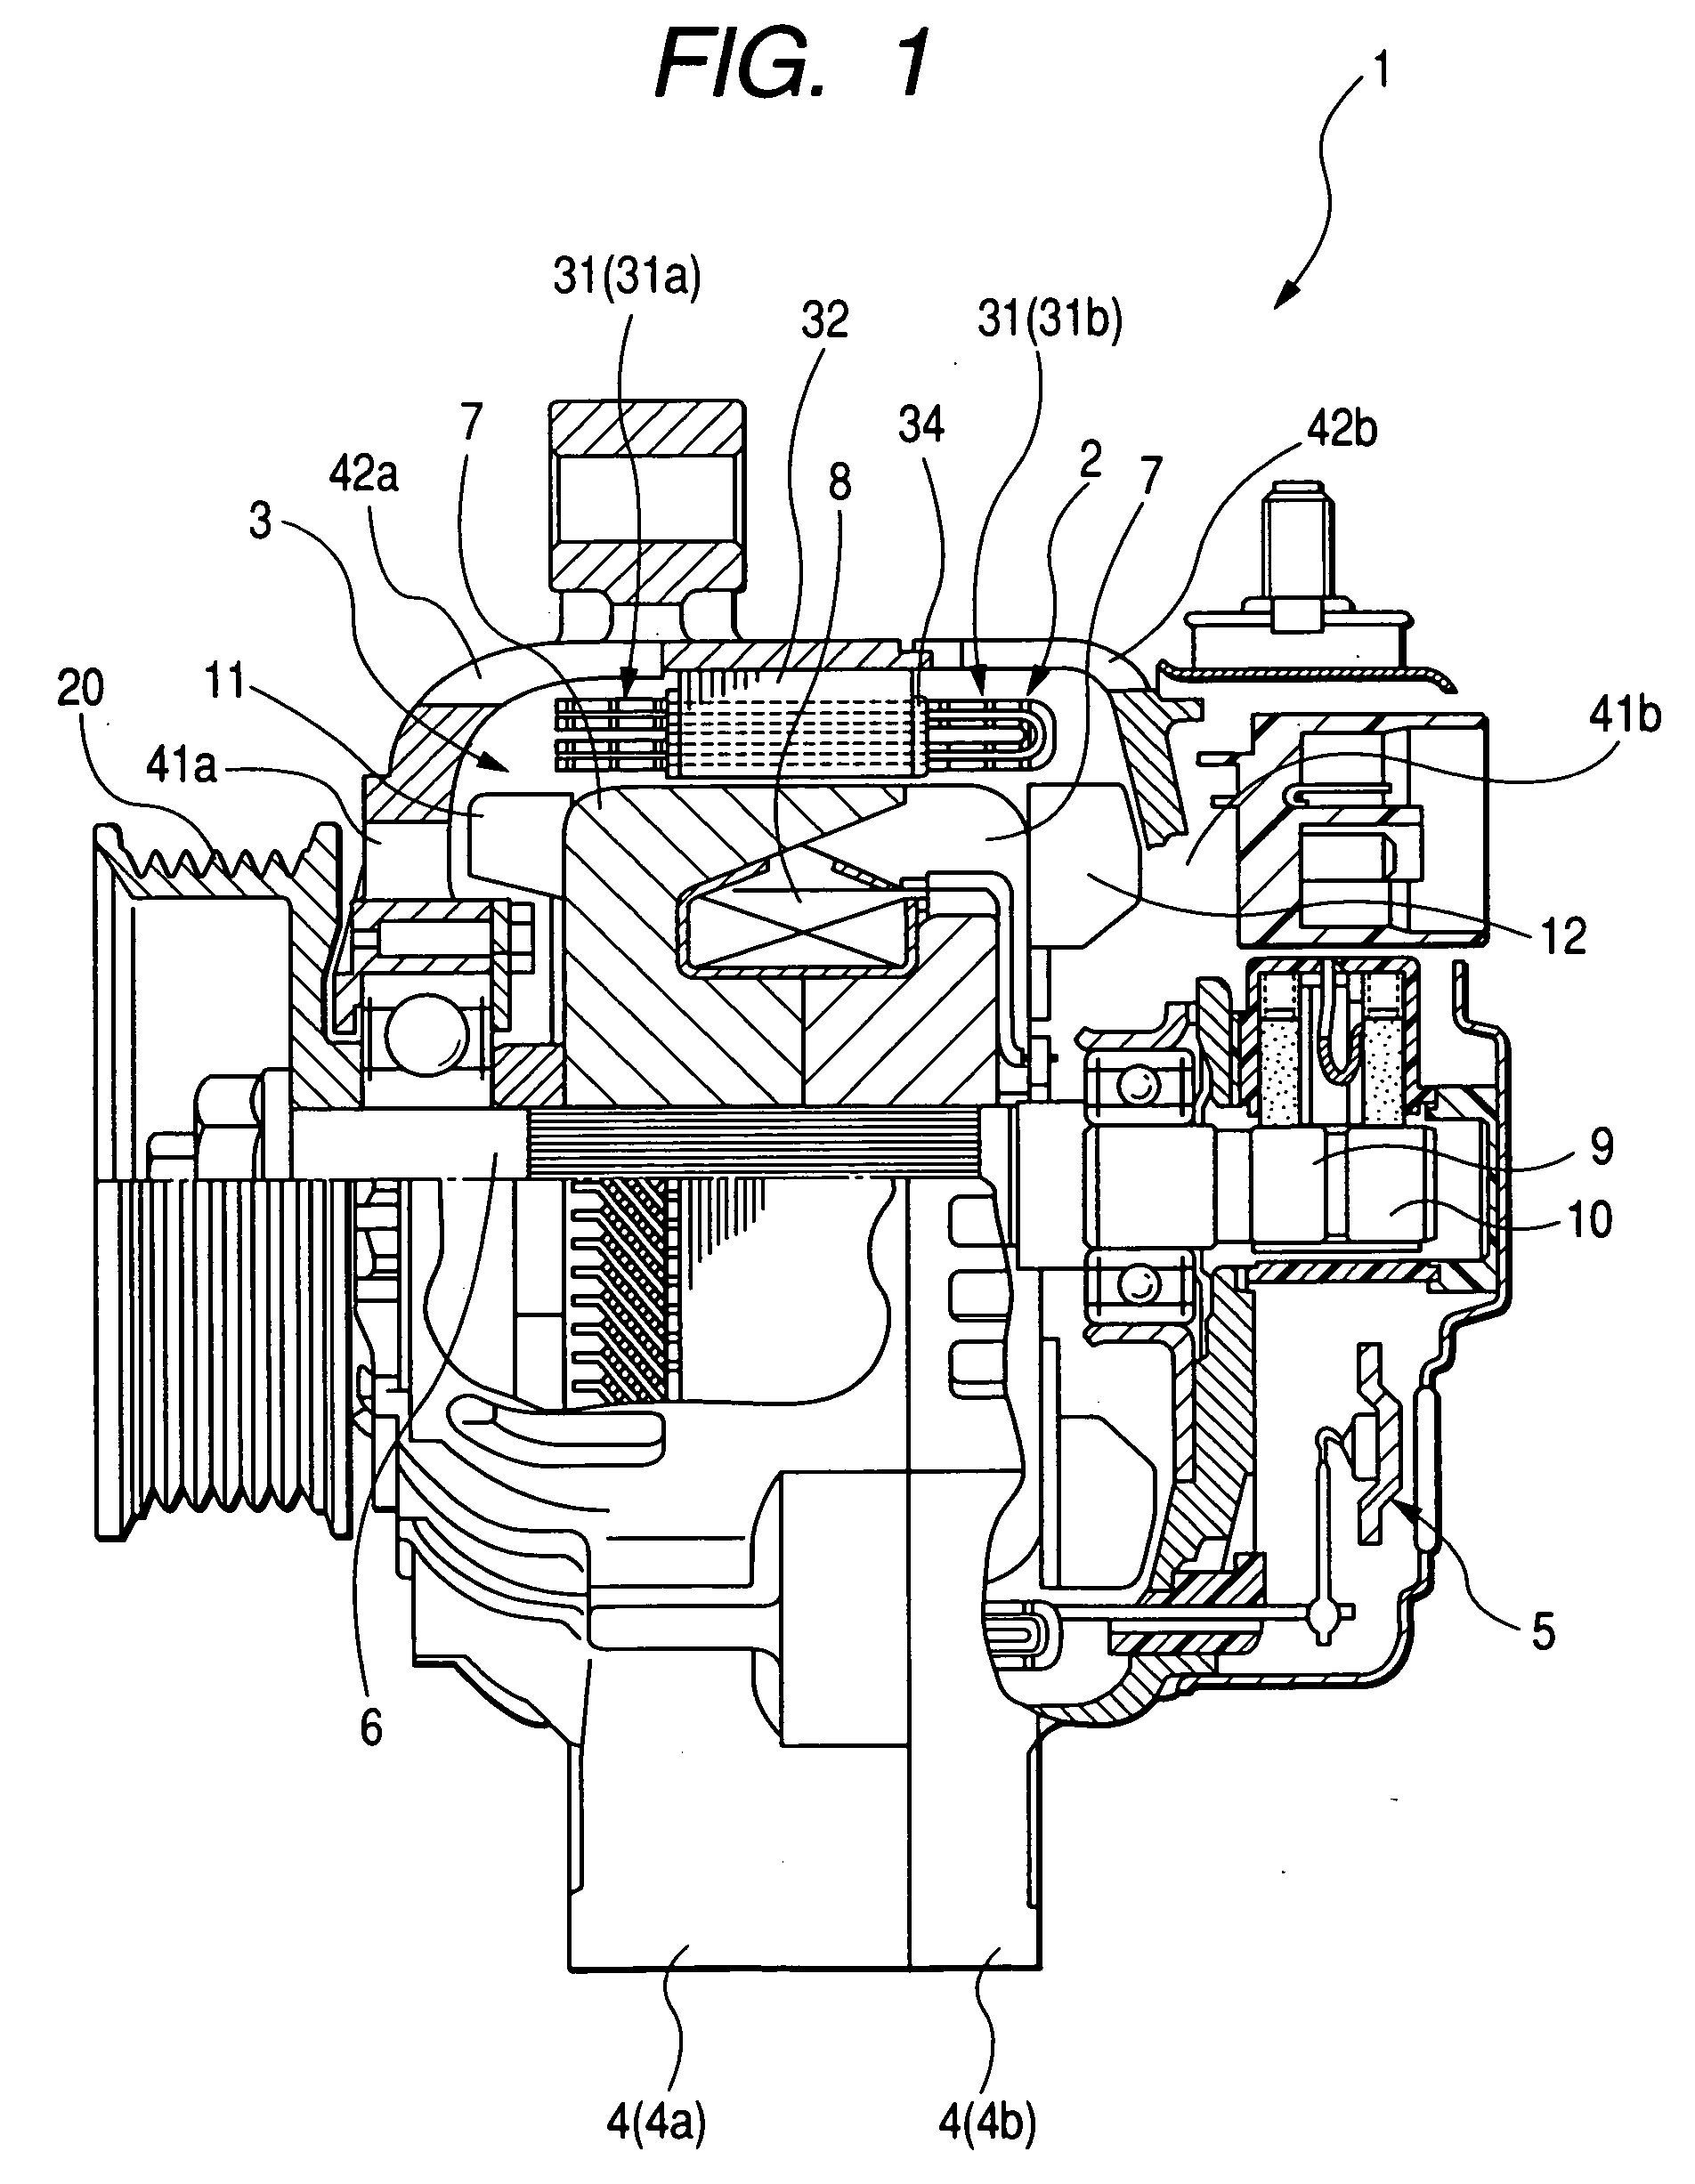 Vehicle AC generator having connection portions of stator winding conductor segments oriented in accordance with direction of cooling air flow